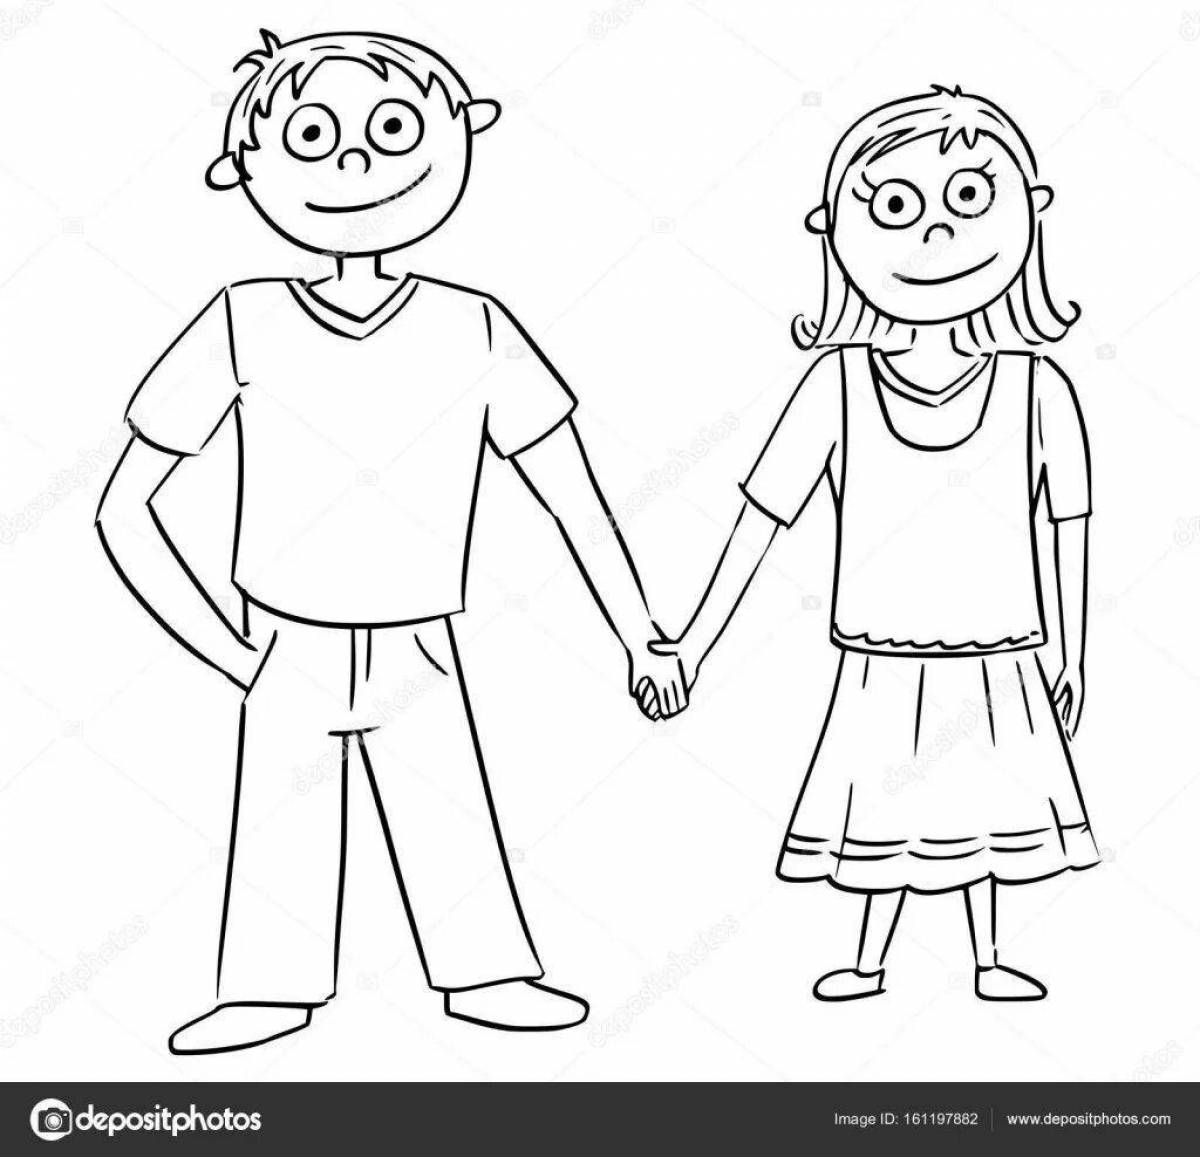 Coloring page cute boy and girl holding hands